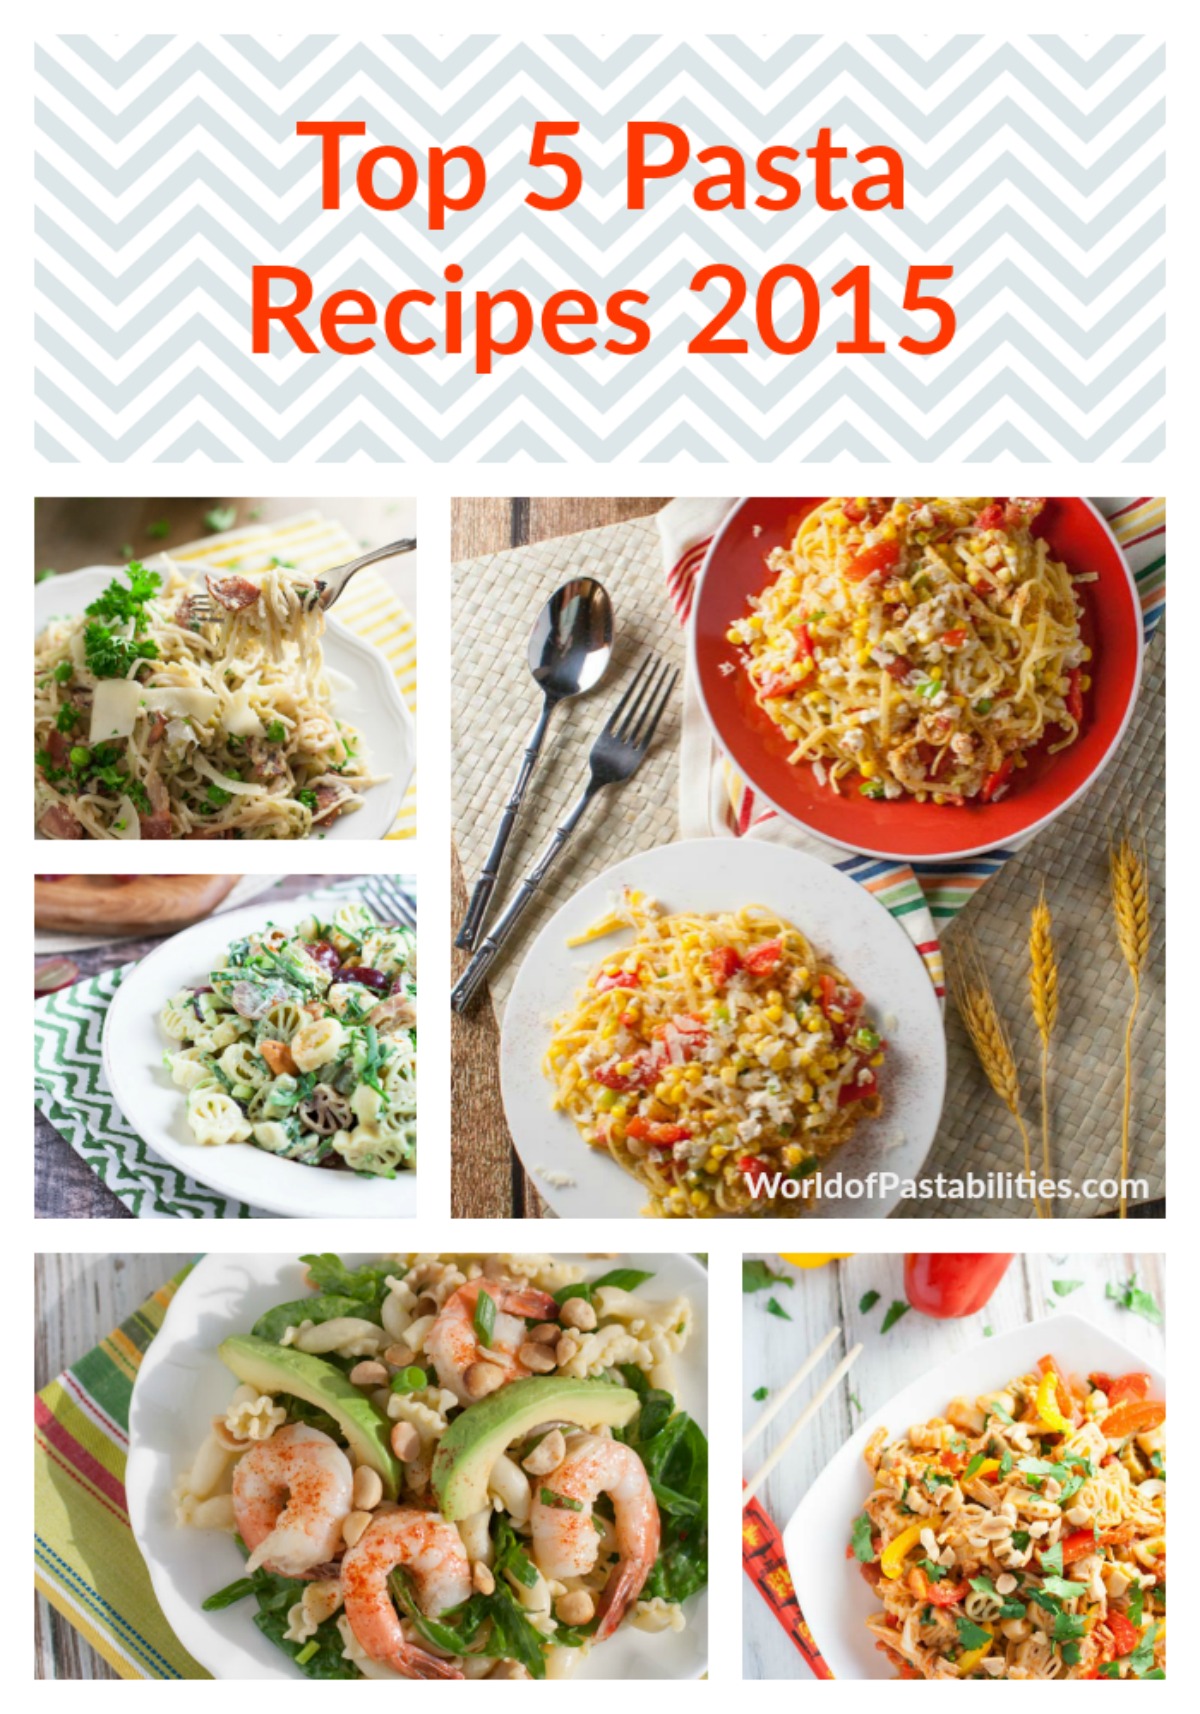 Top 5 Pasta Recipes 2015 | WorldofPastabilities.com | Tried and true favorite recipes from 2015! Must do's for 2016!